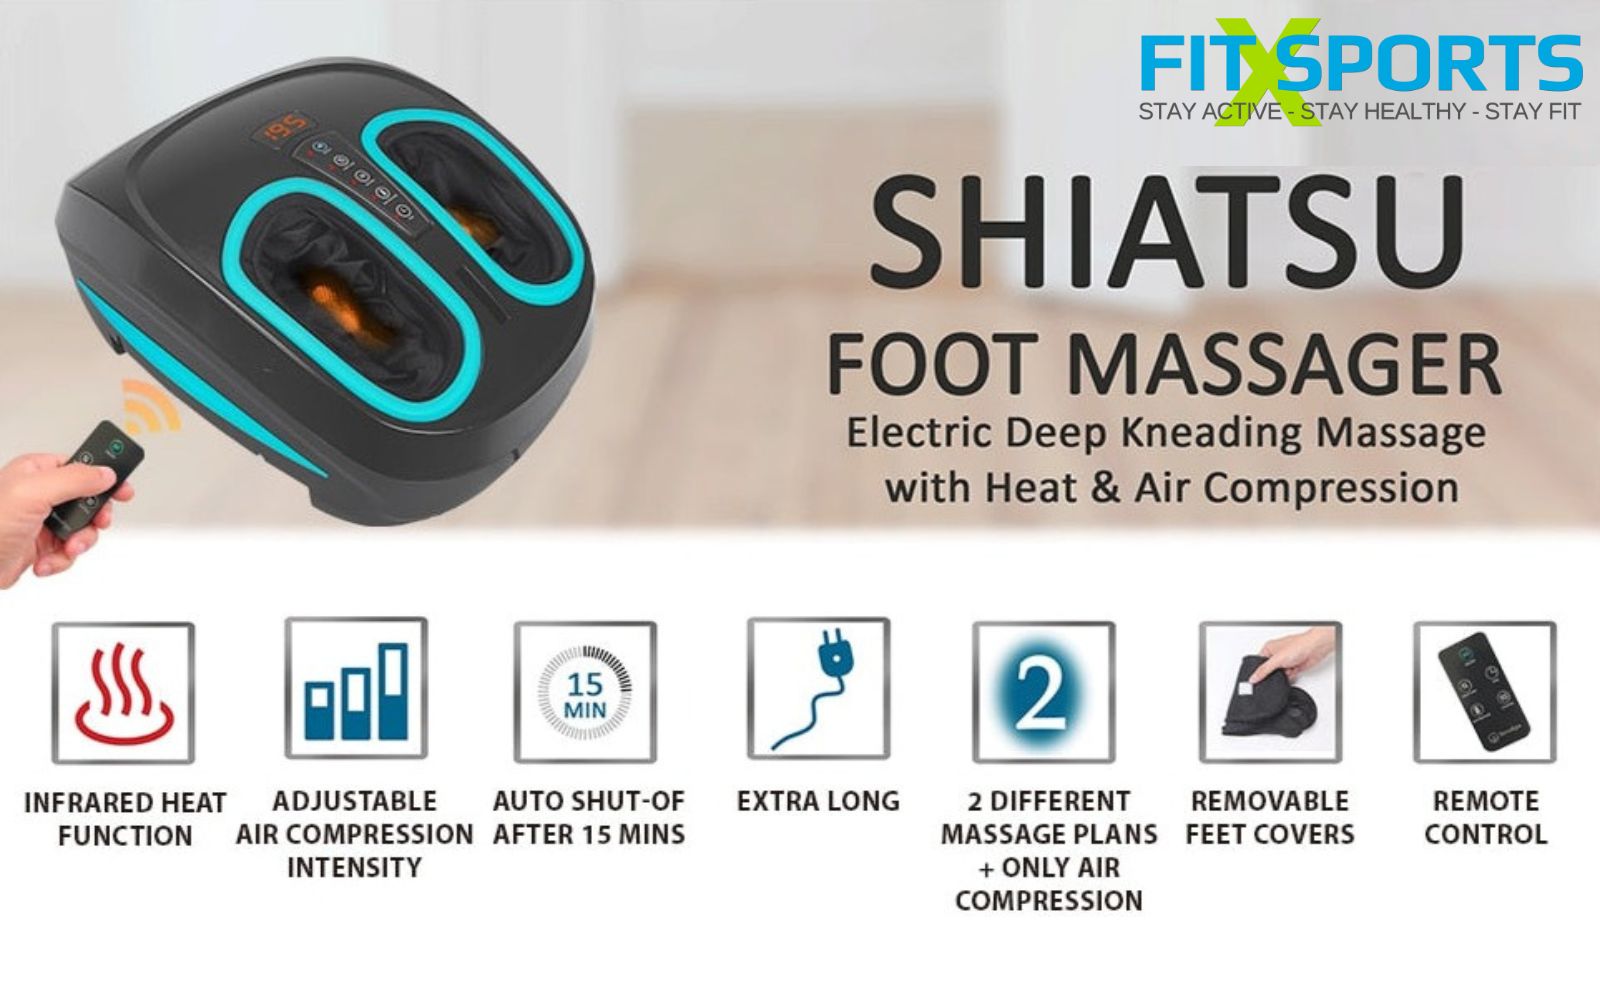 Shiatsu Foot Massager With Infrared Heat Deep Kneading Heated Foot Massage With Air Compression Unisex